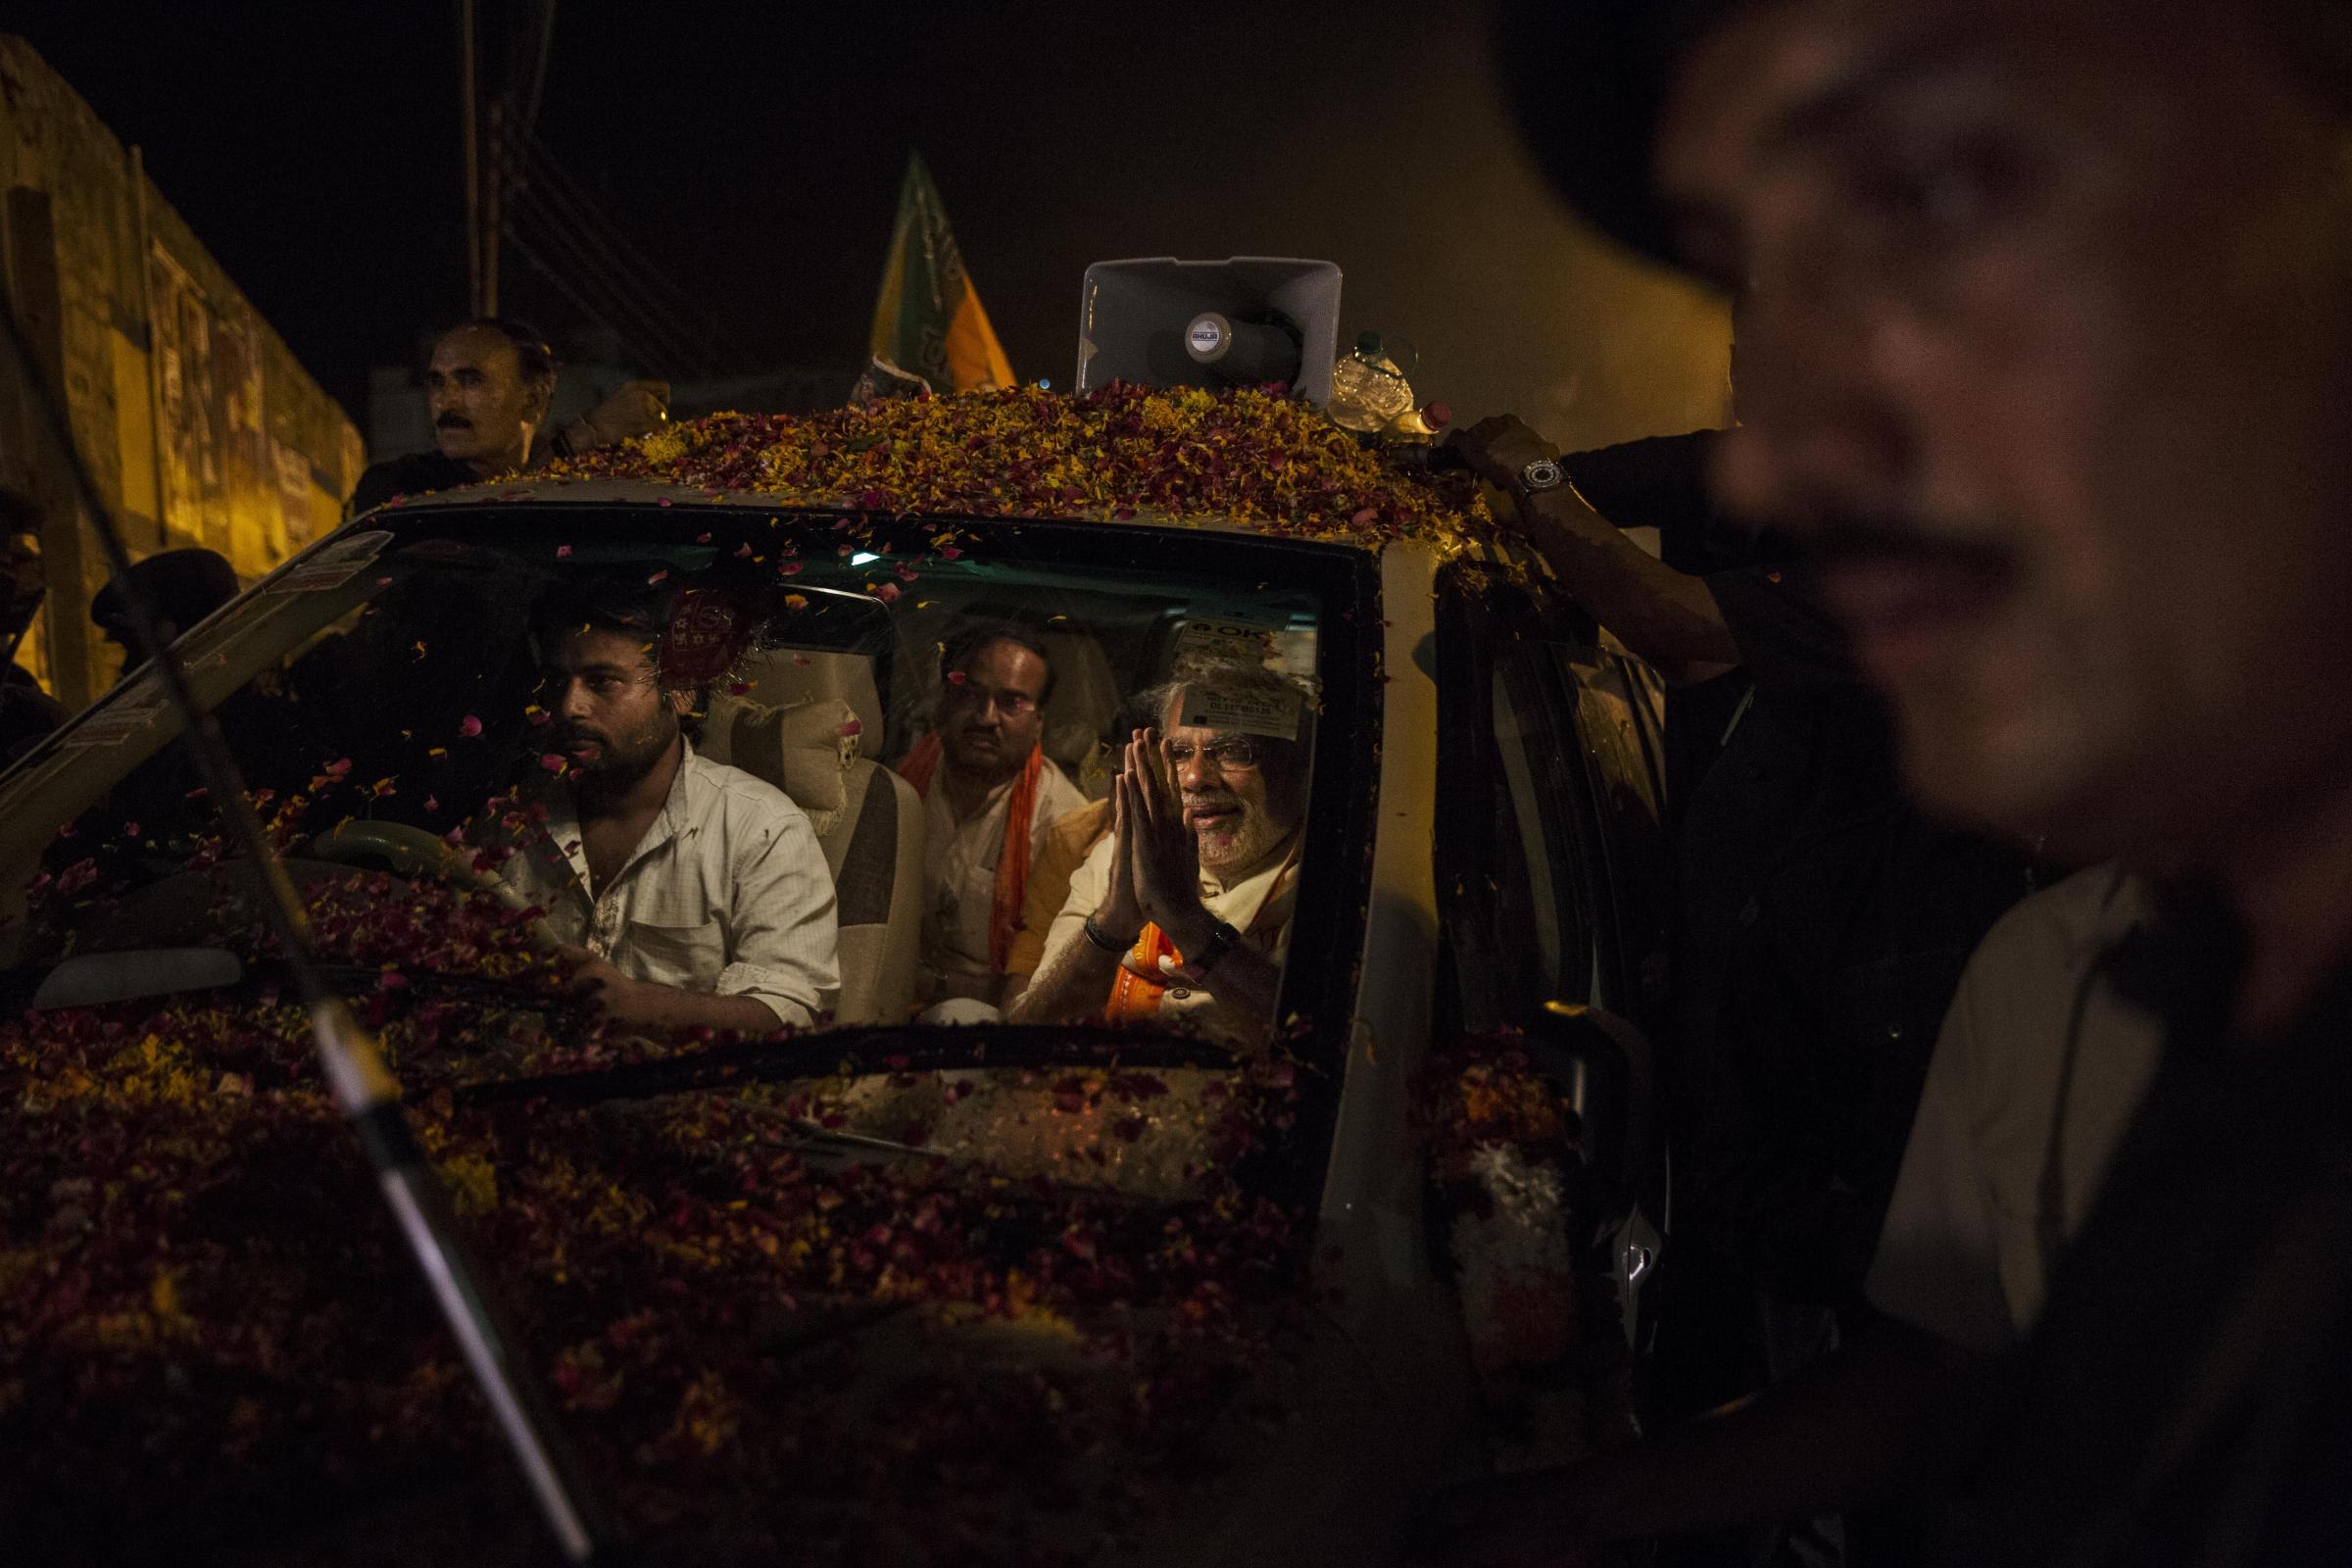 BJP leader Narendra Modi greets supporters as he is surrounded by bodyguards while driving through the streets on May 8, 2014 in Varanasi.